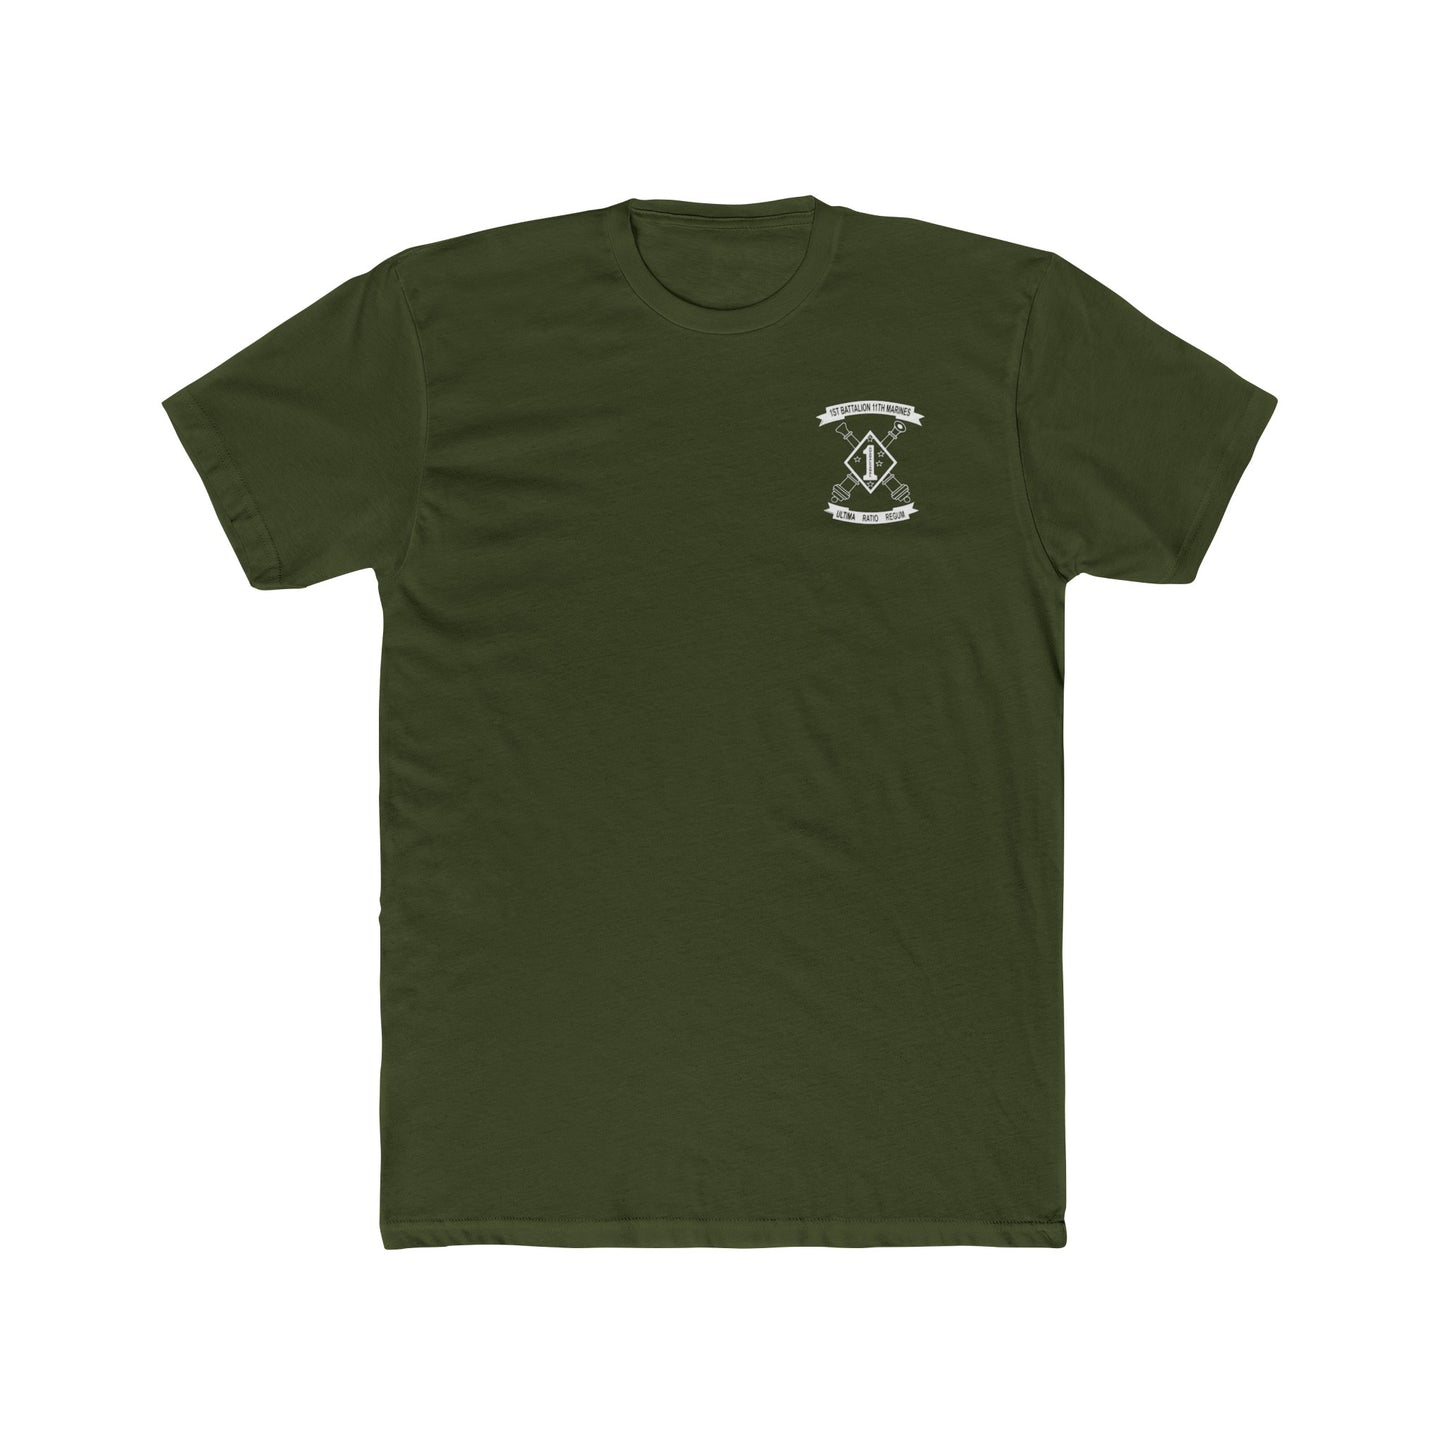 Charlie Battery 1st Battalion 11th Marines Tee